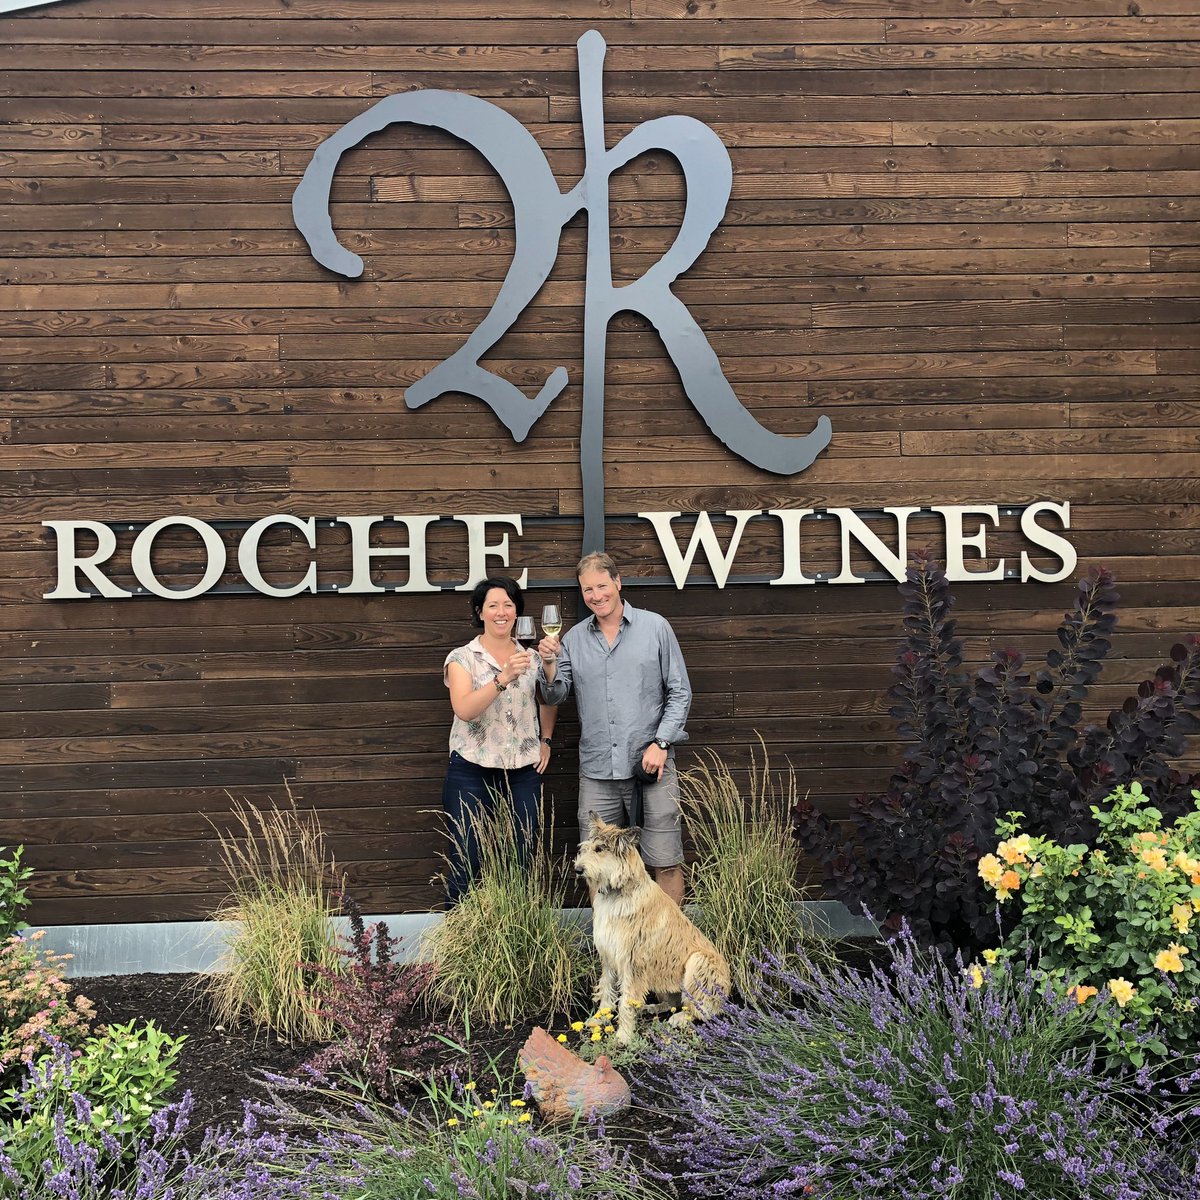 Everyone raise a glass for this occasion; our 2nd year birthday, a momentous celebration!

#rochewinesistwo #birthday #rochewines #teamroche #frenchtradition #familyowned #longjourney #builtfromthegroundup #naramatabench #bcwine